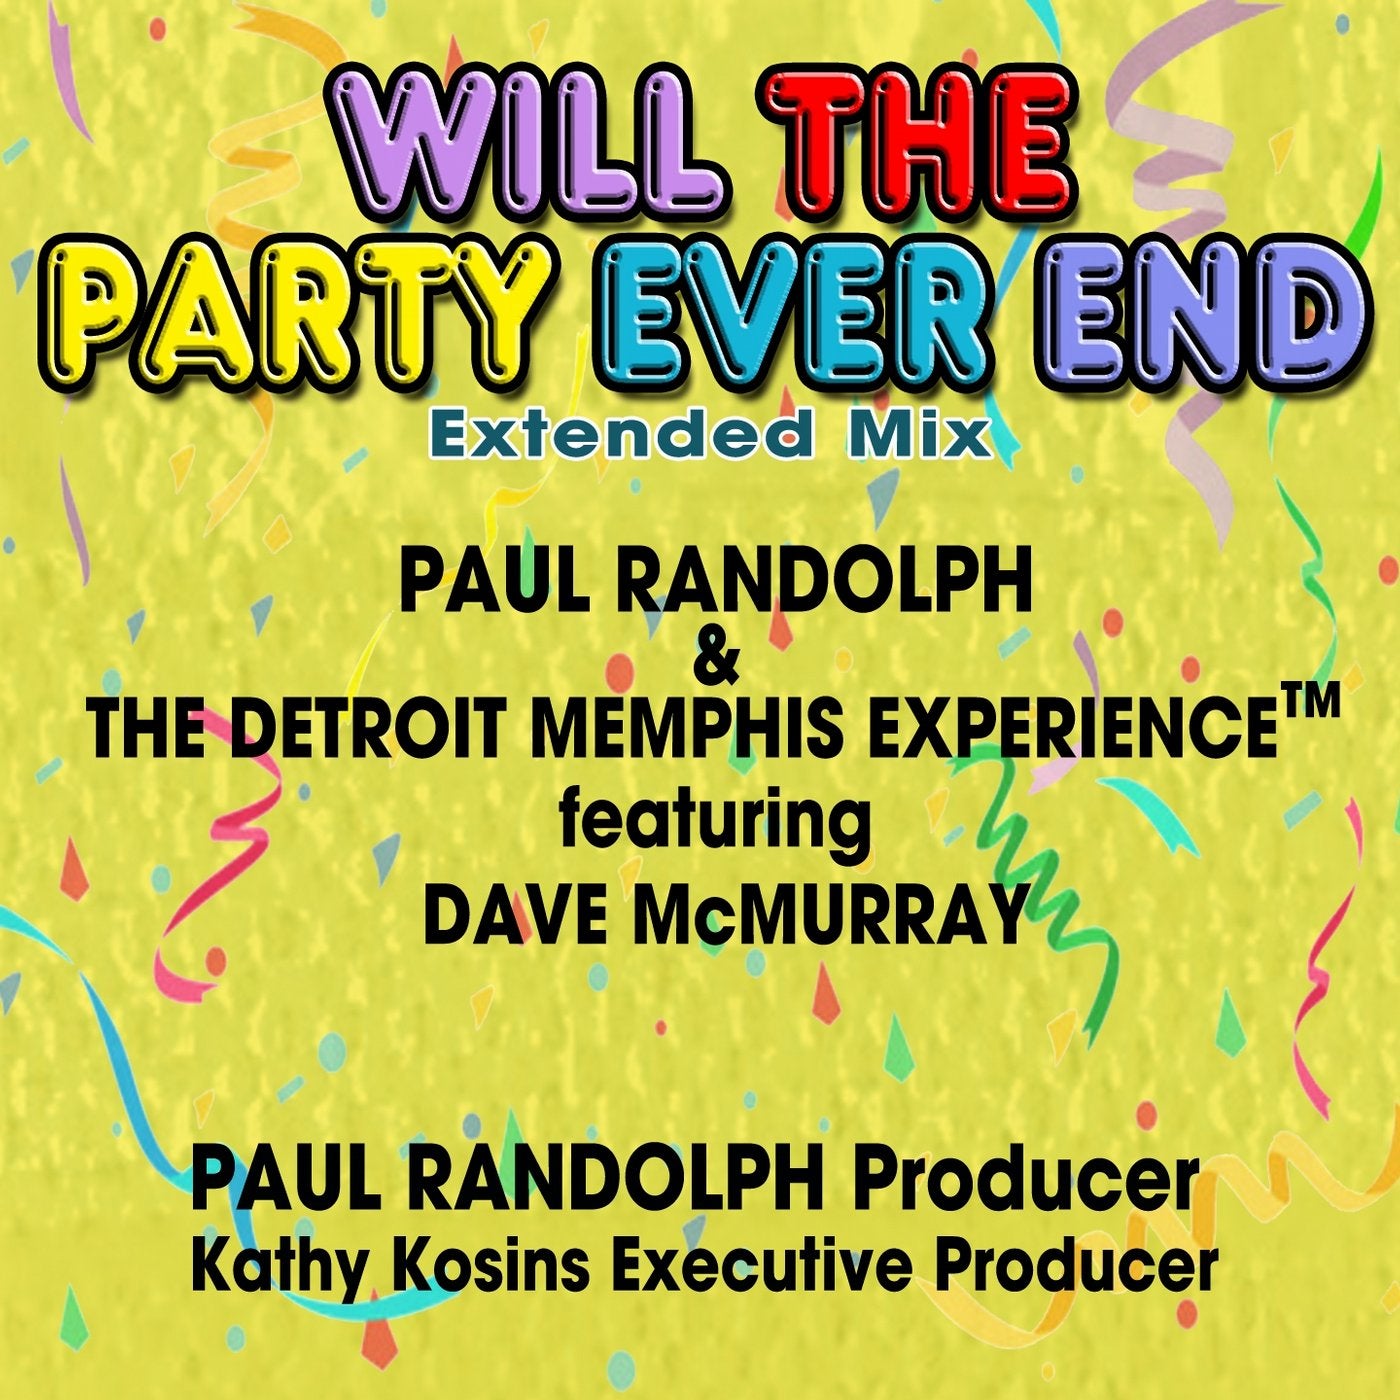 Will the Party Ever End, Extended Mix (Extended Mix)